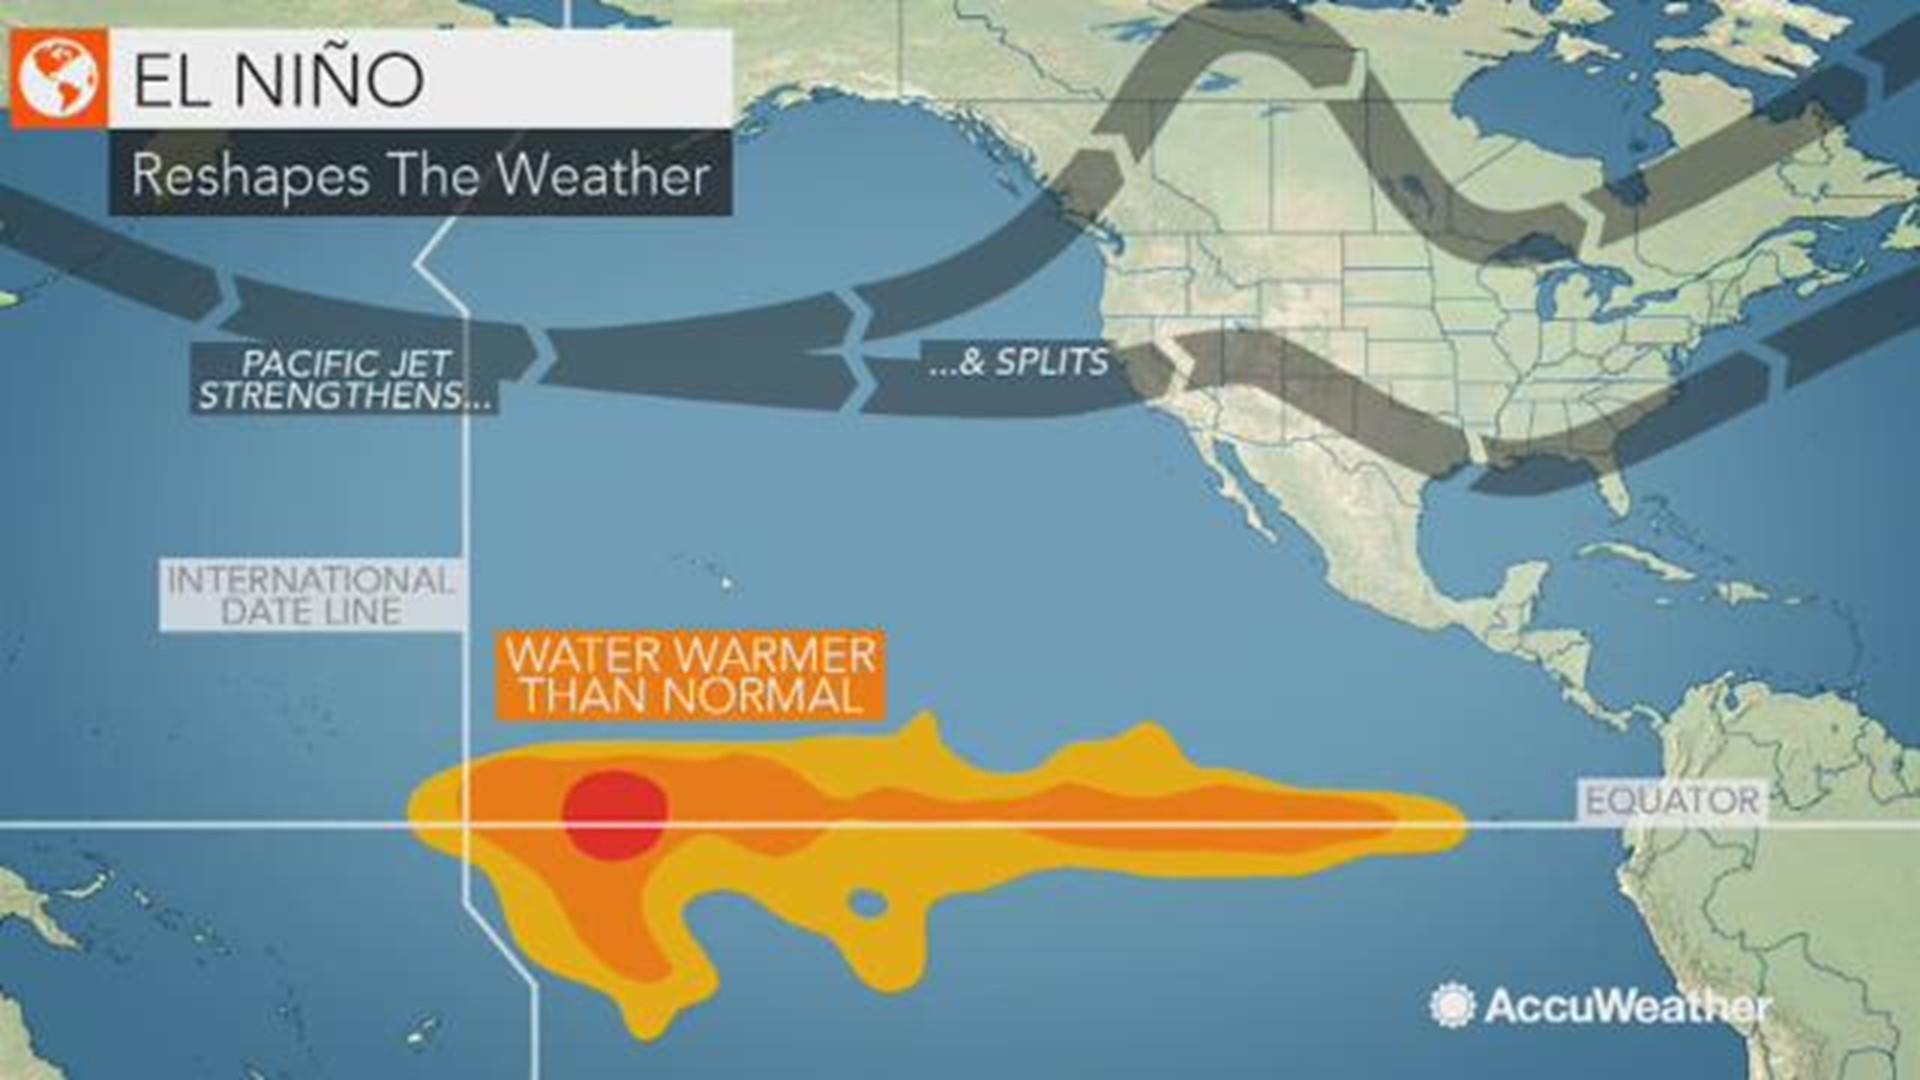 What is el nino and how does it impact our weather in the United States?